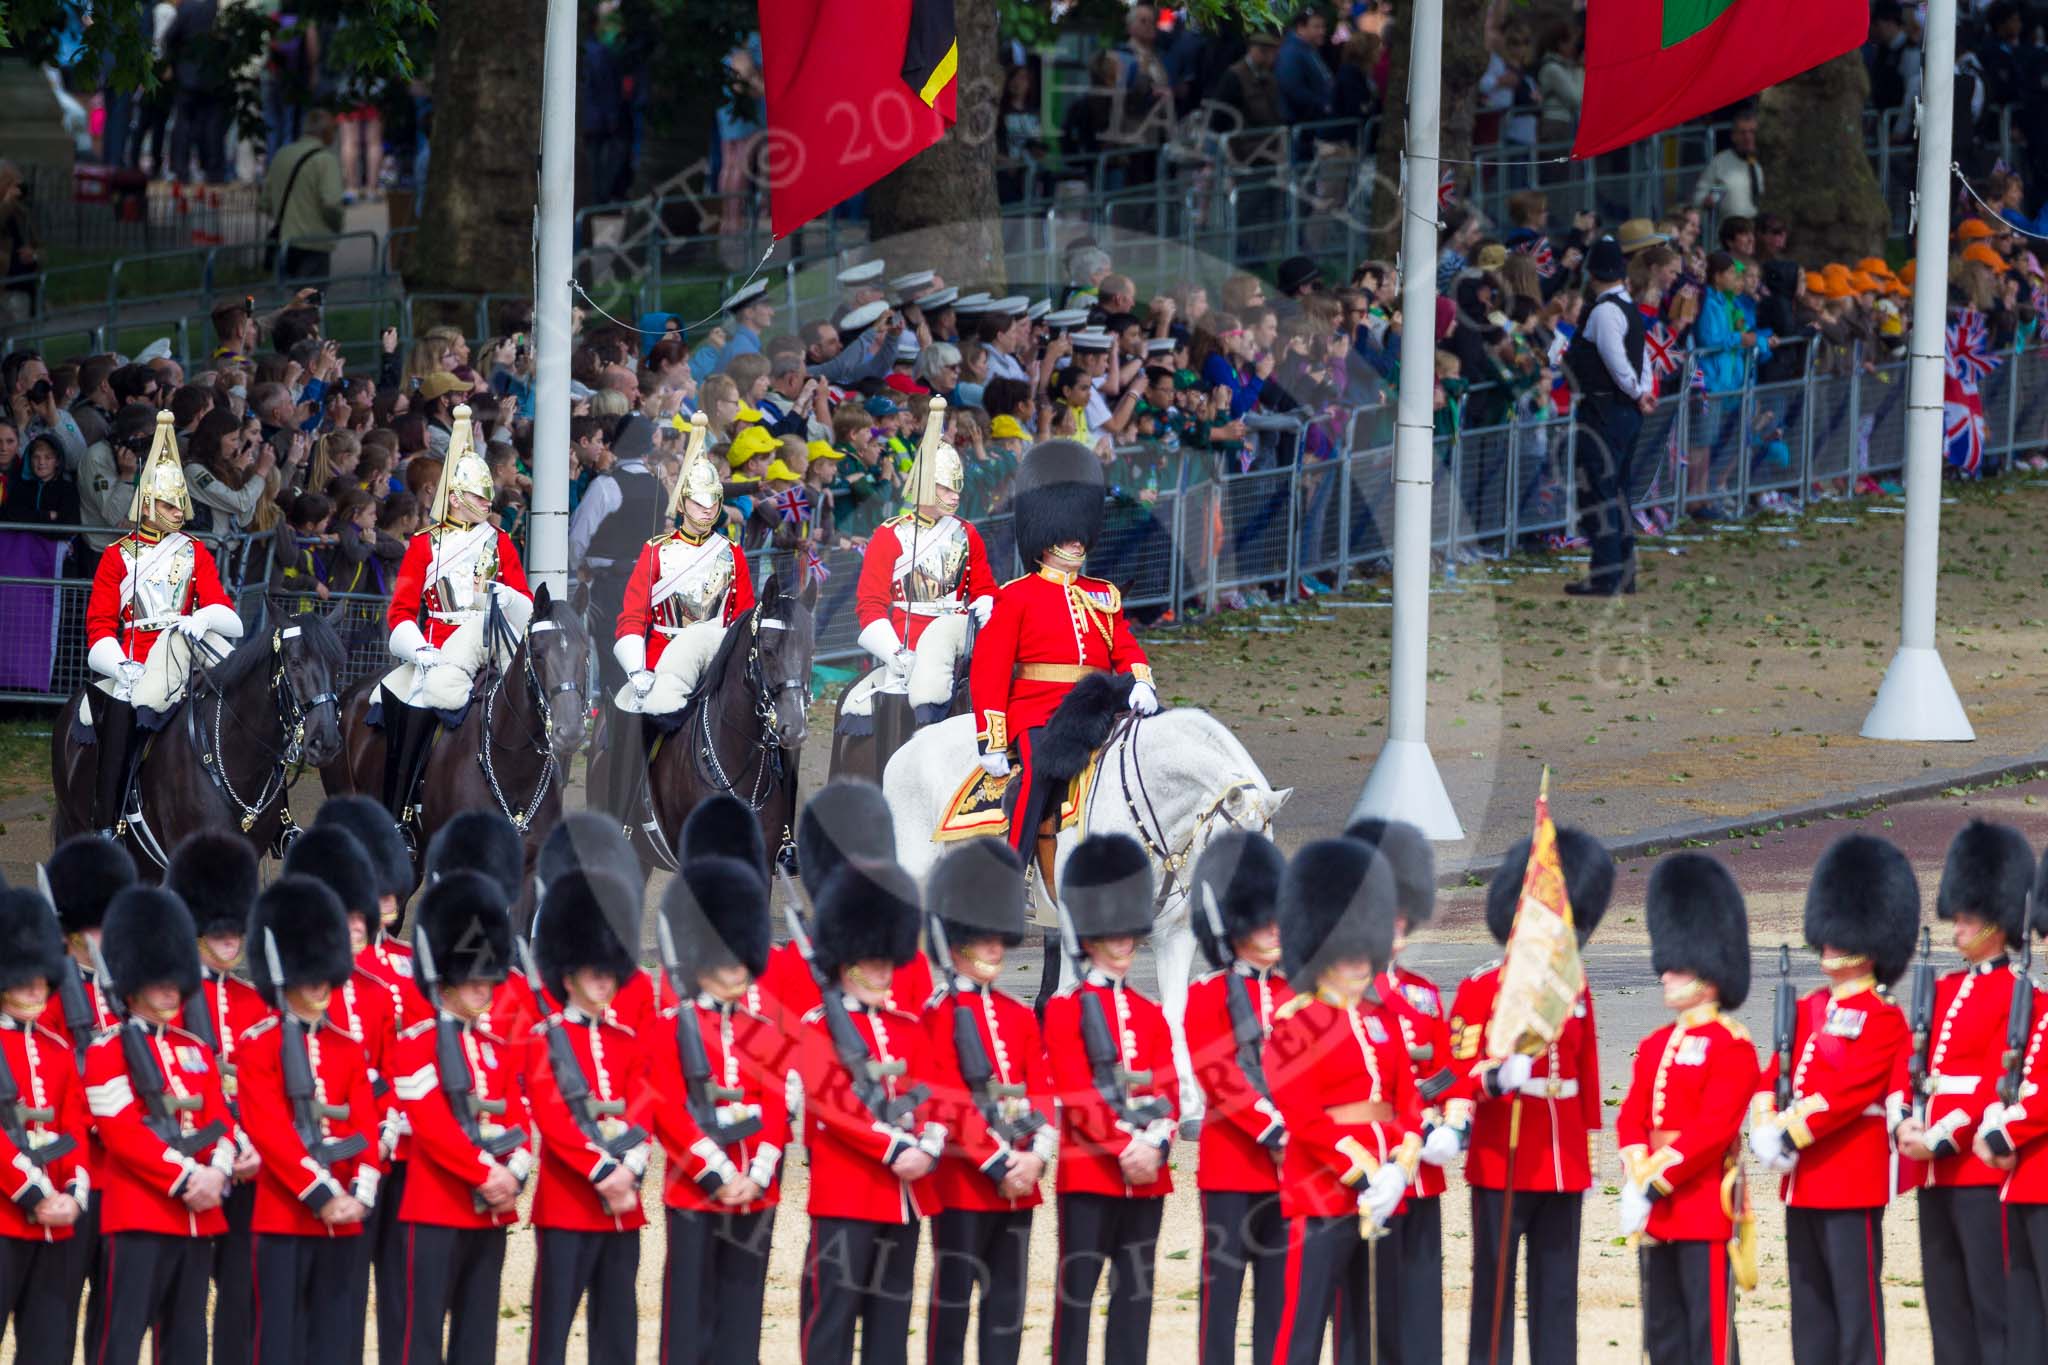 The Colonel's Review 2015.
Horse Guards Parade, Westminster,
London,

United Kingdom,
on 06 June 2015 at 10:55, image #159